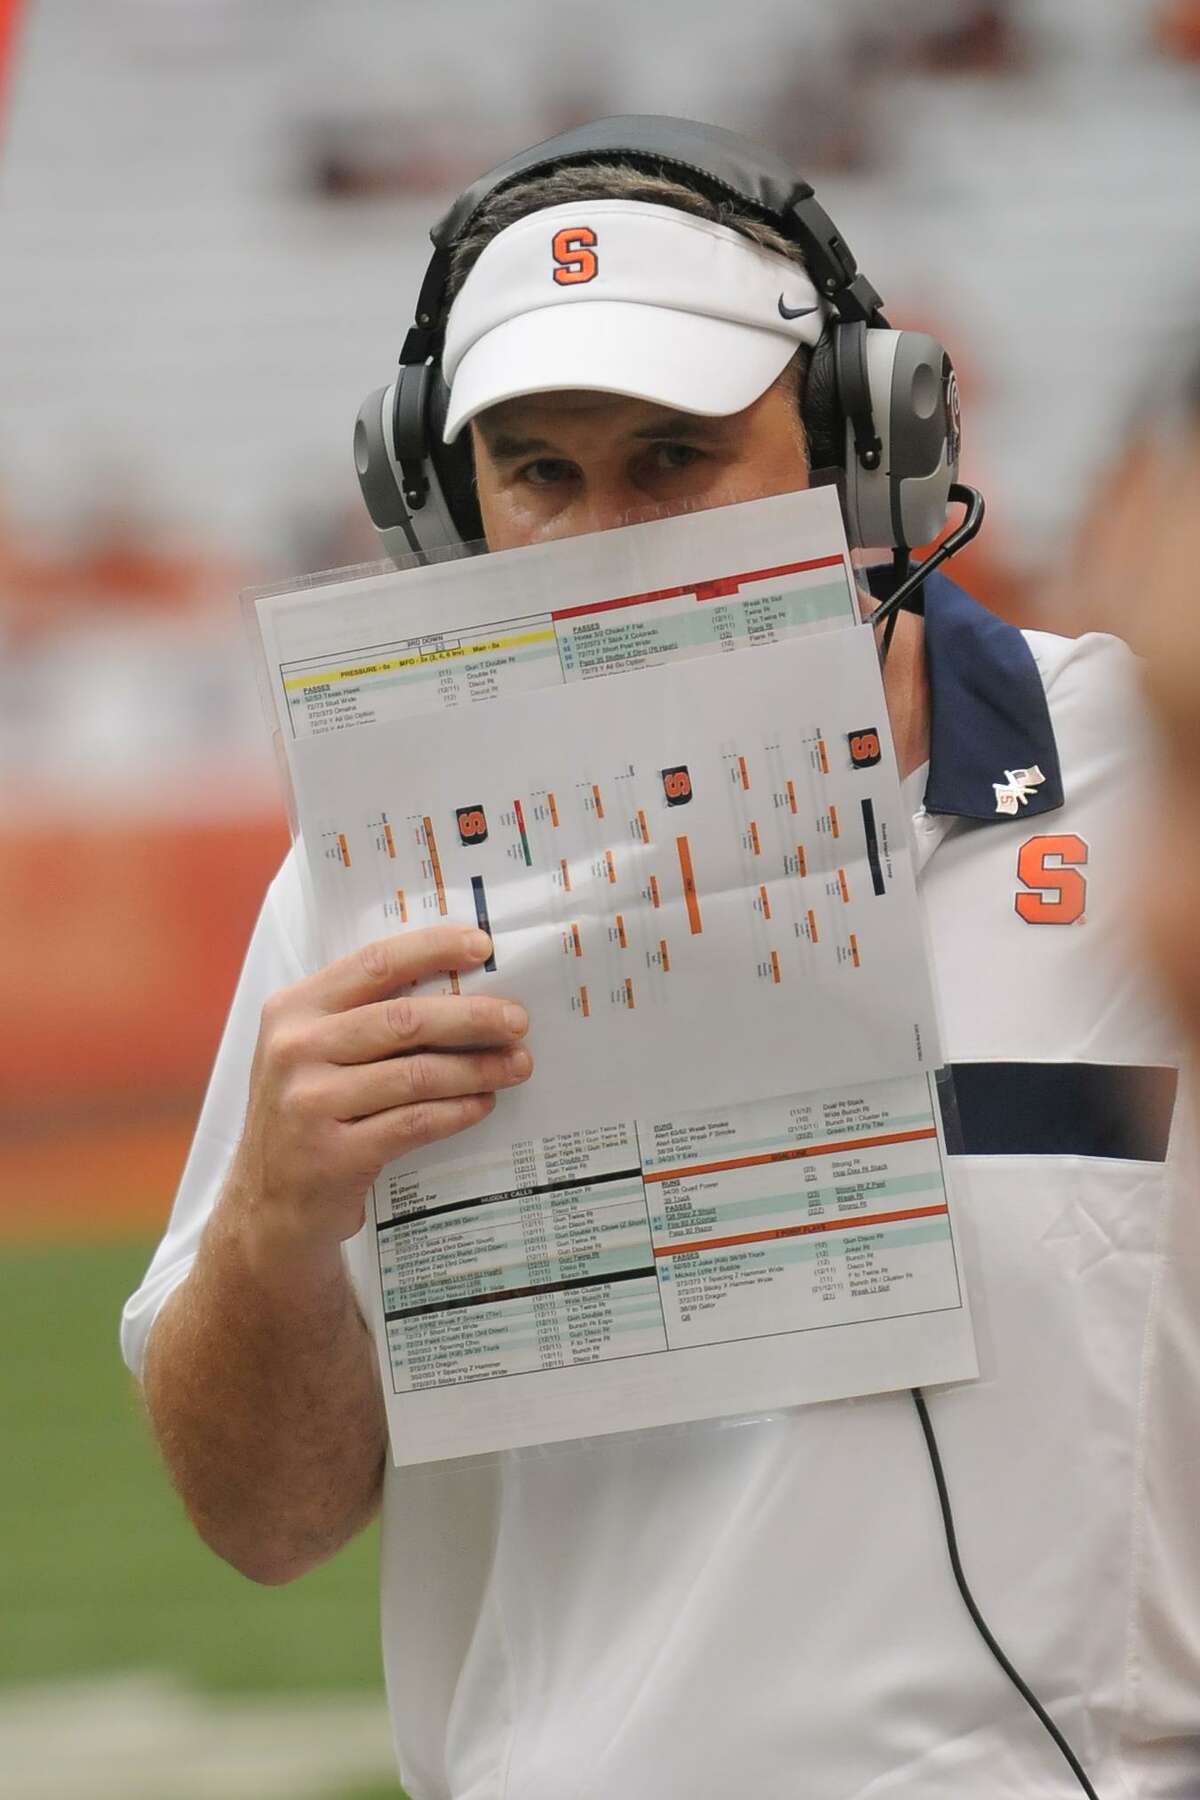 Syracuse coach Doug Marrone calls in a play against Rhode Island during an NCAA college football at the Carrier Dome in Syracuse, N.Y. on Saturday, Sept. 10, 2011. (AP Photo/Steve Jacobs)